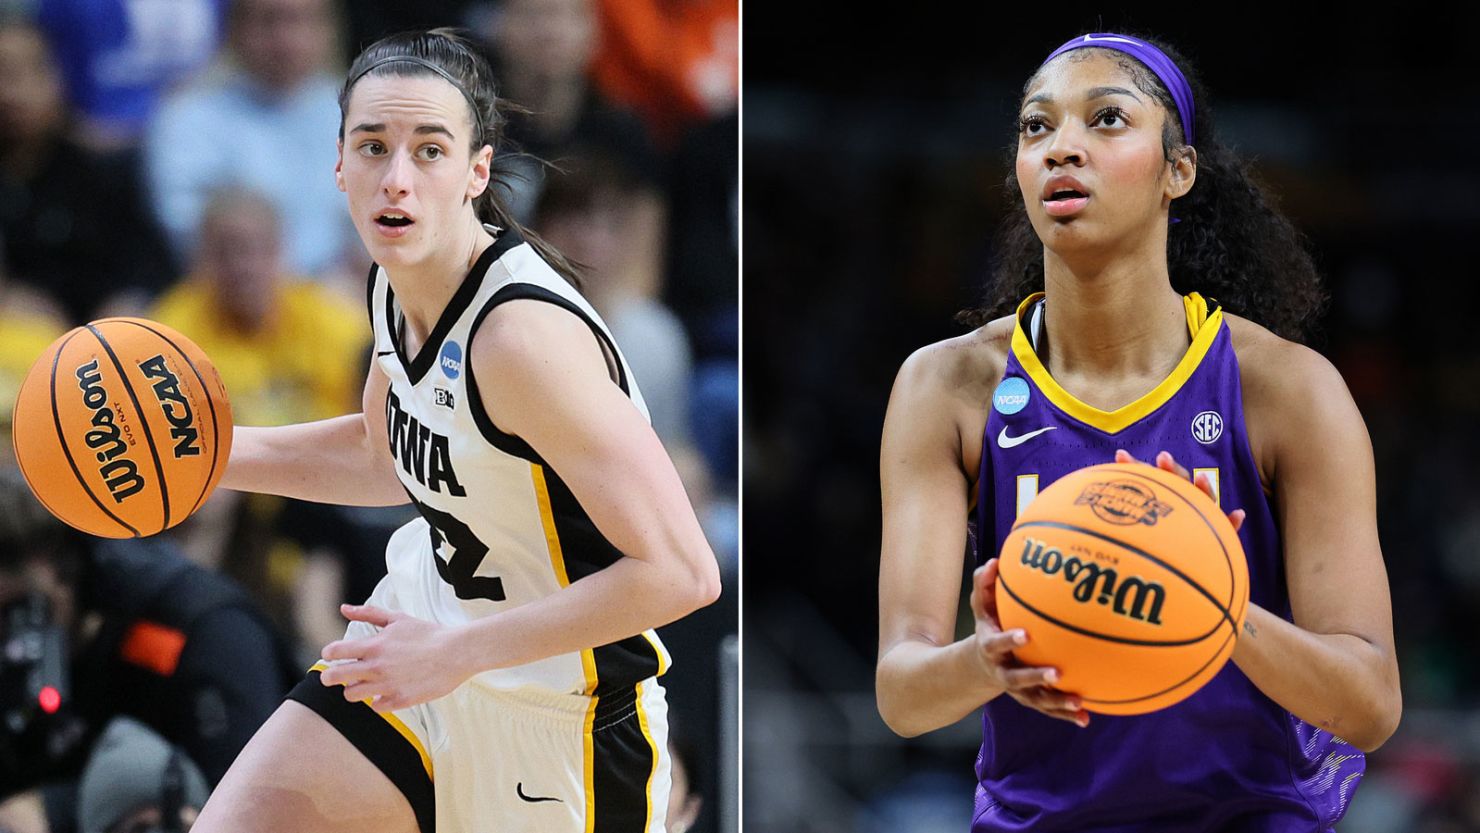 Caitlin Clark and the Iowa Hawkeyes got a rematch of last year's national championship game and came out on top this time against Angel Reese and the LSU Tigers.